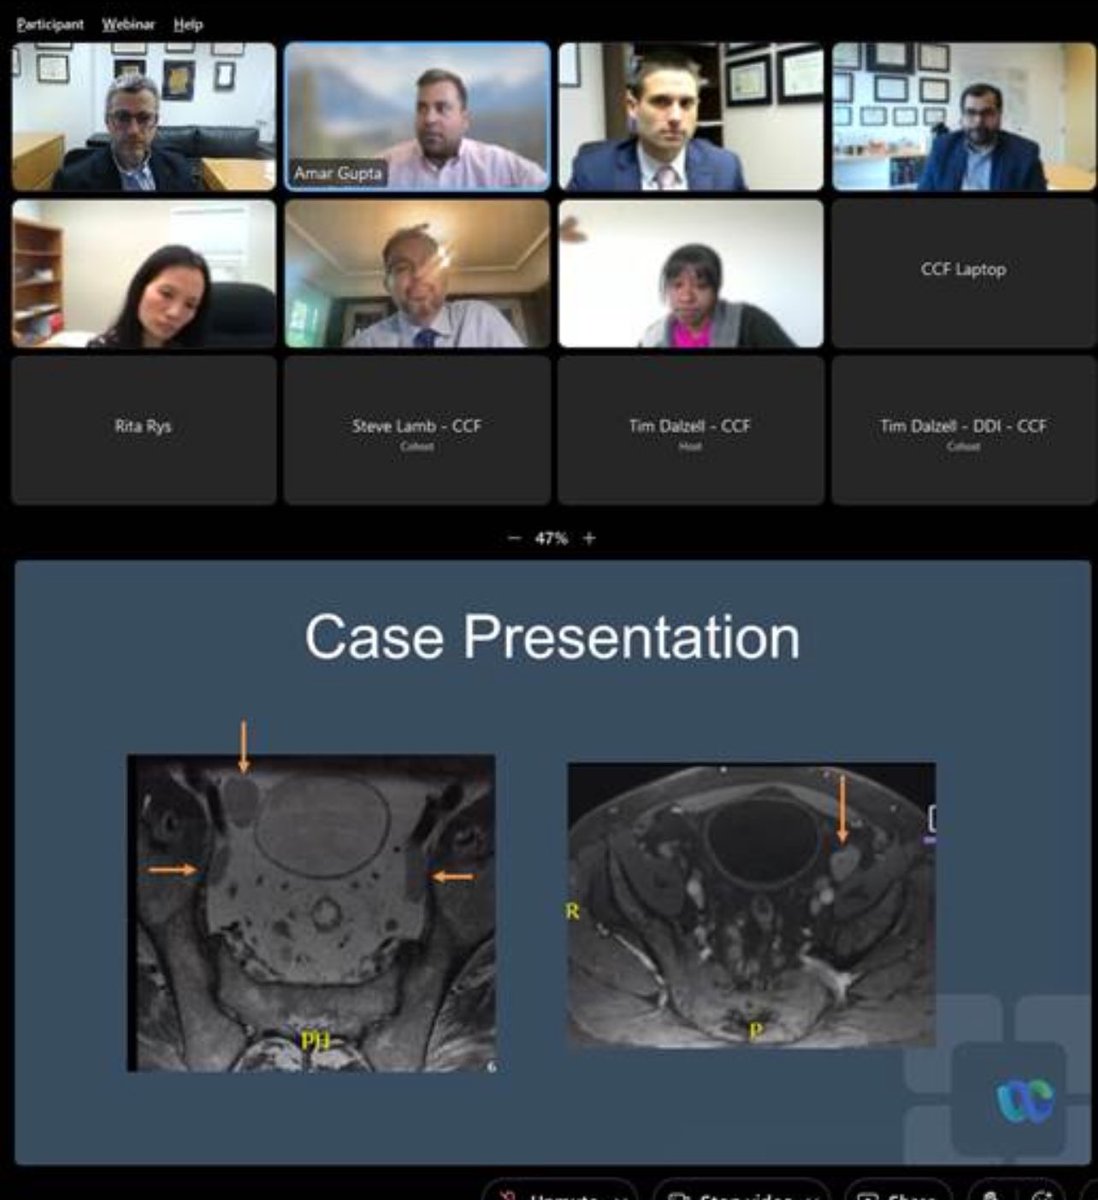 Excellent LIVE from @ClevelandClinic moderated by @davidrrosenmd and @ScottRSteeleMD discussing state of the art management of rectal cancer with lateral pelvic lymph node metastasis. @MRegueiroMD